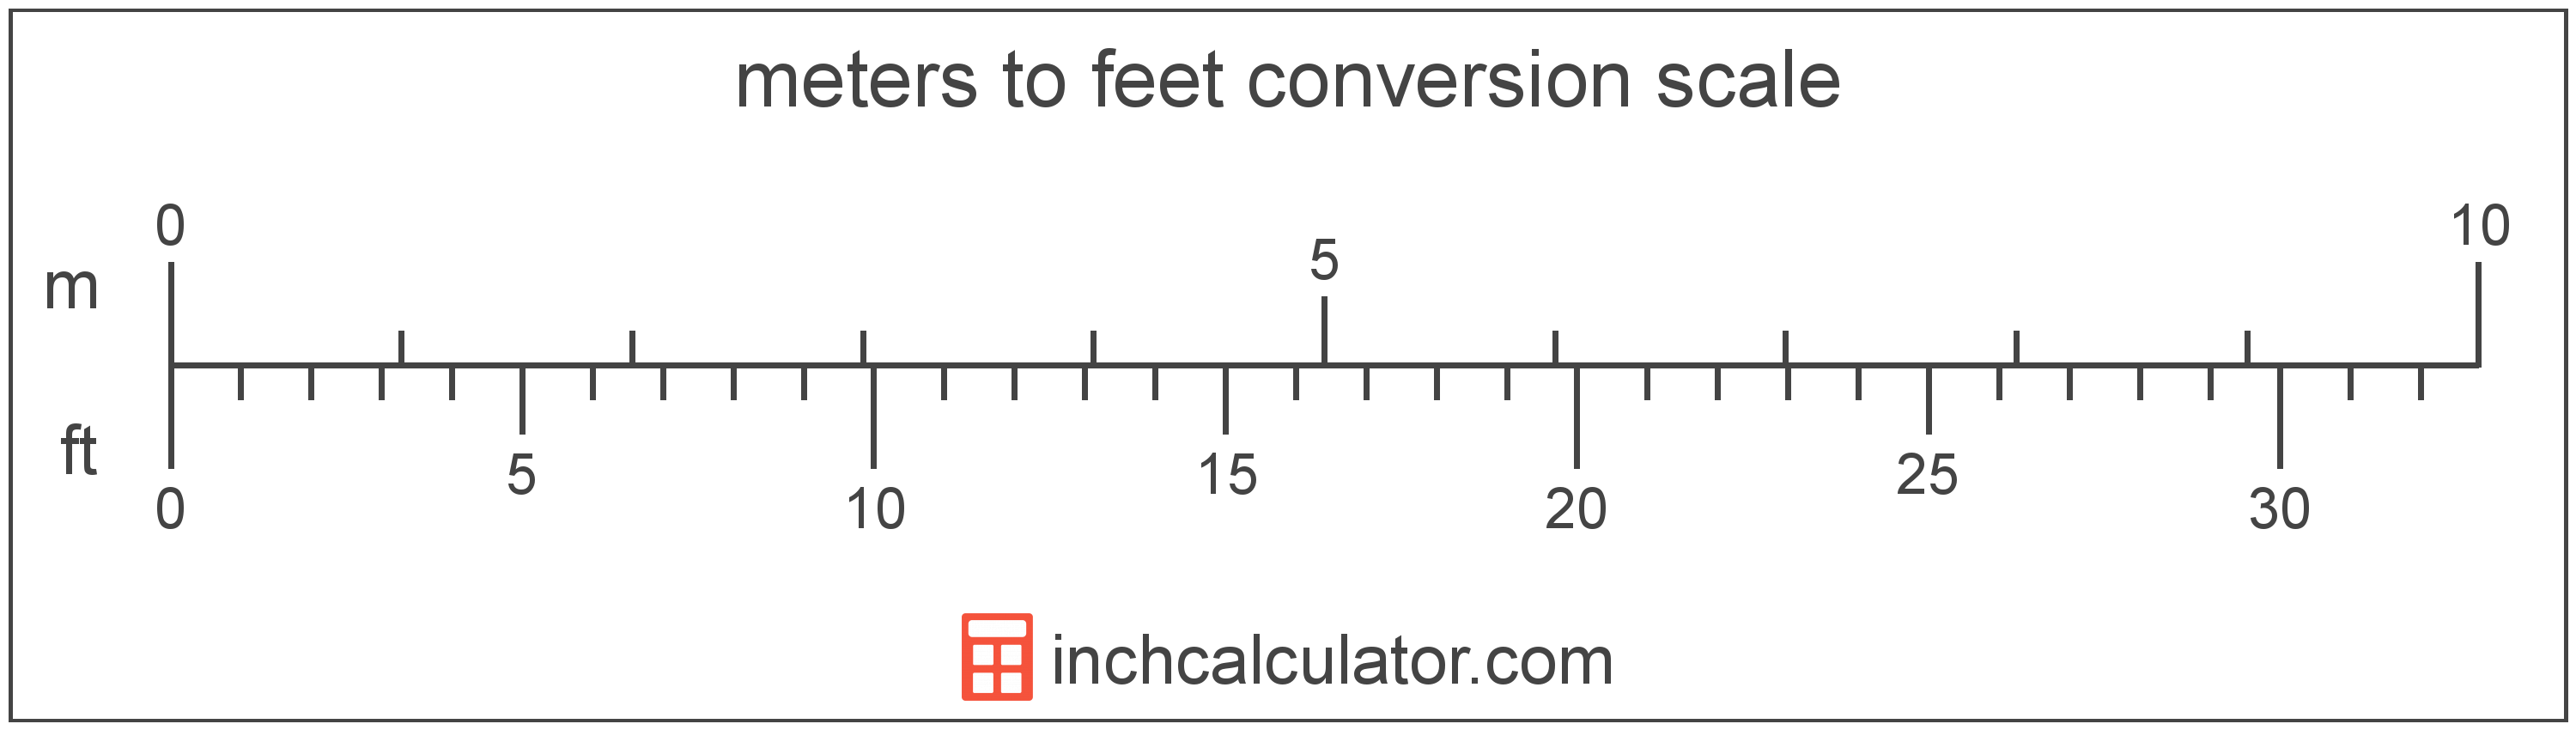 Feet To Meters Conversion Chart Download